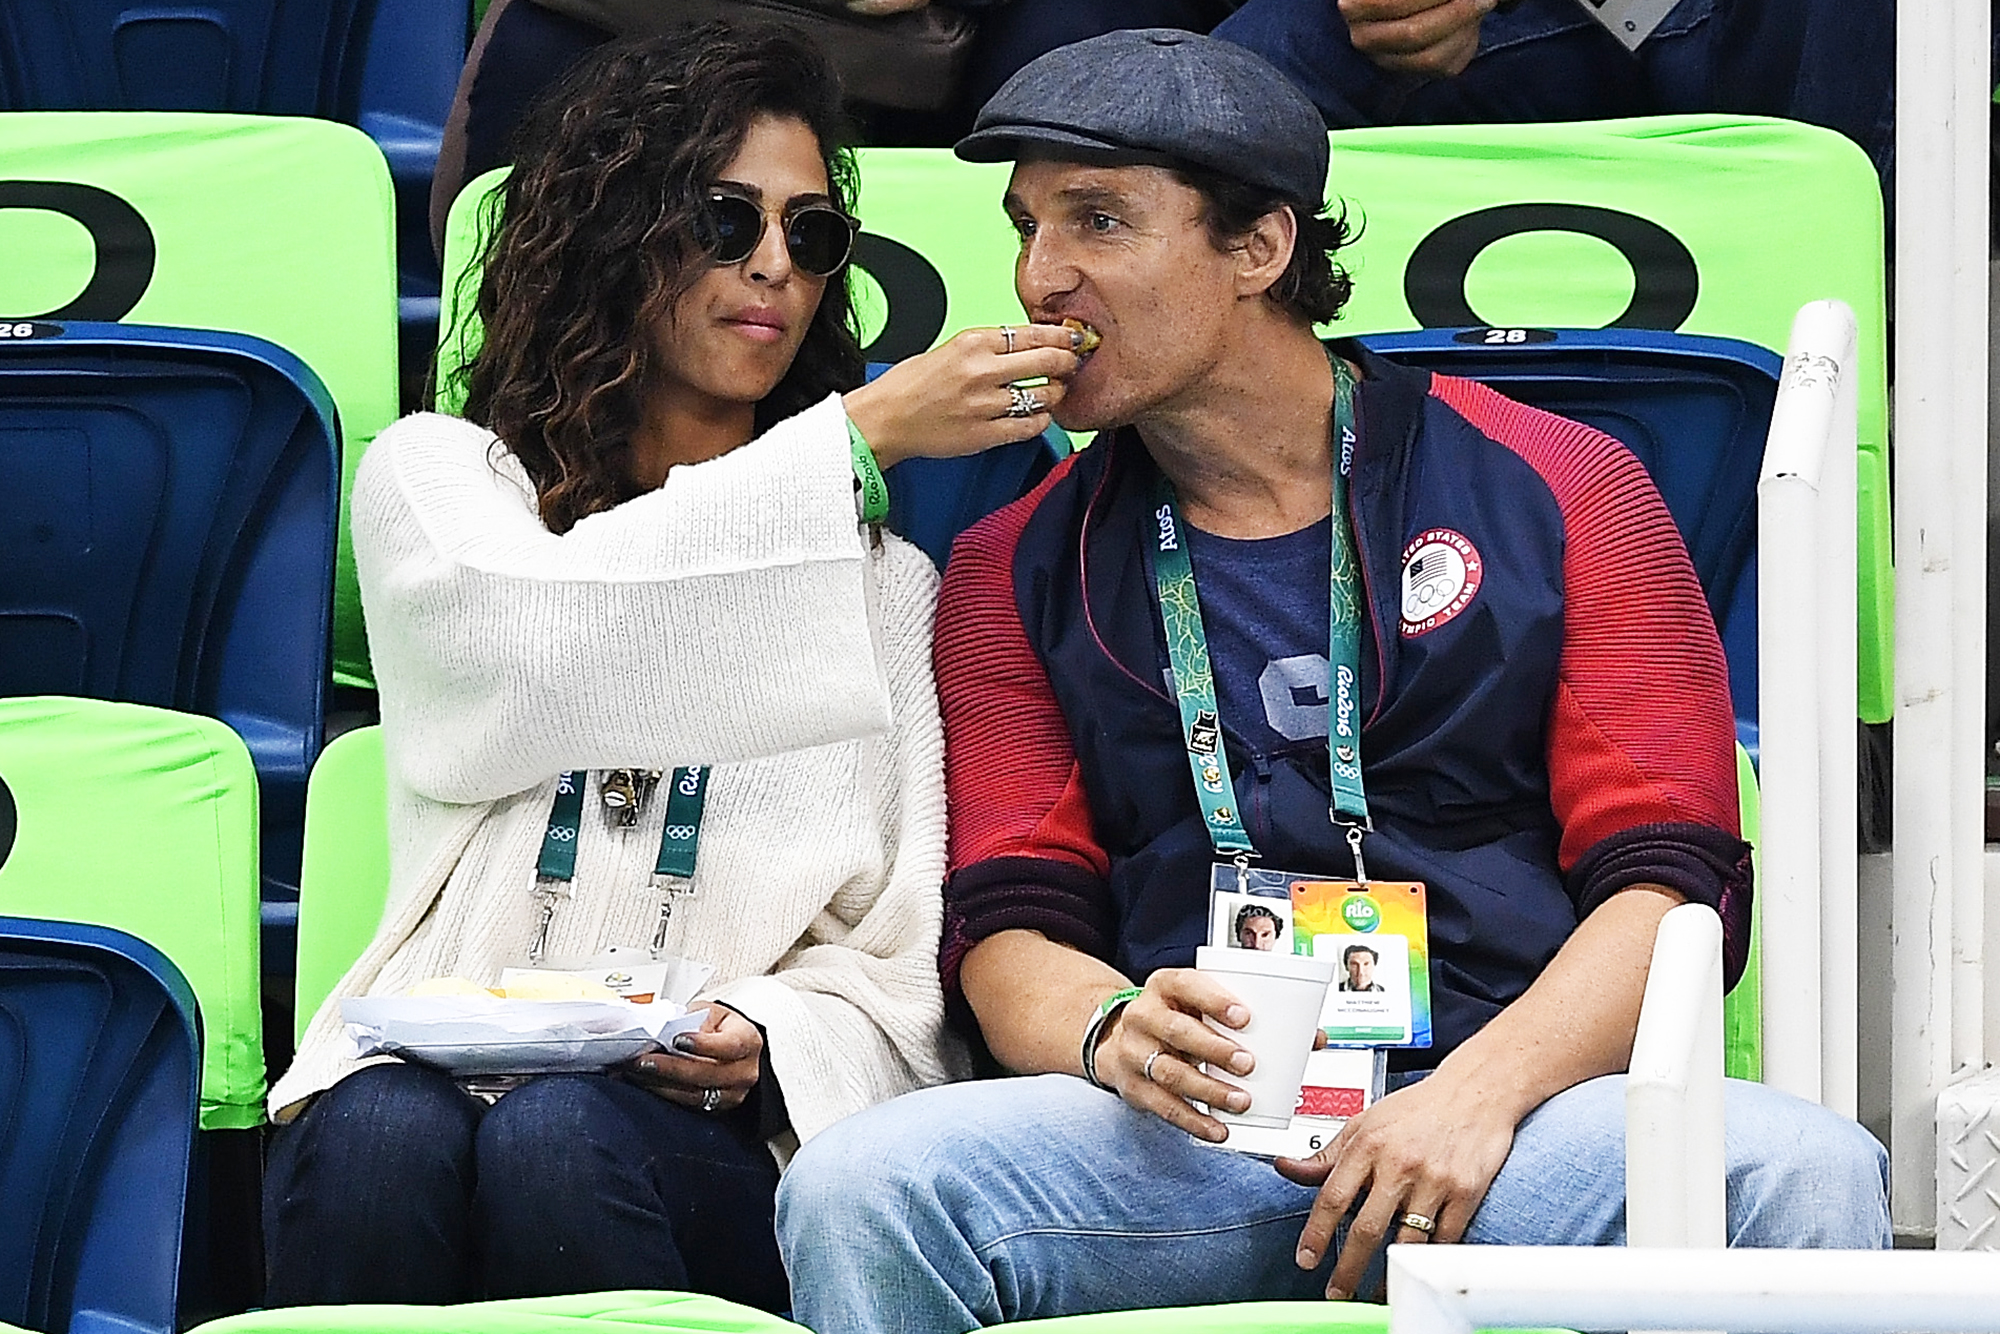 Matthew McConaughey and Camilla Alvez attend swimming semifinals and finals on Day 5 of the Rio 2016 Olympic Games, on Aug. 9, 2016 in Rio de Janeiro, Brazil.